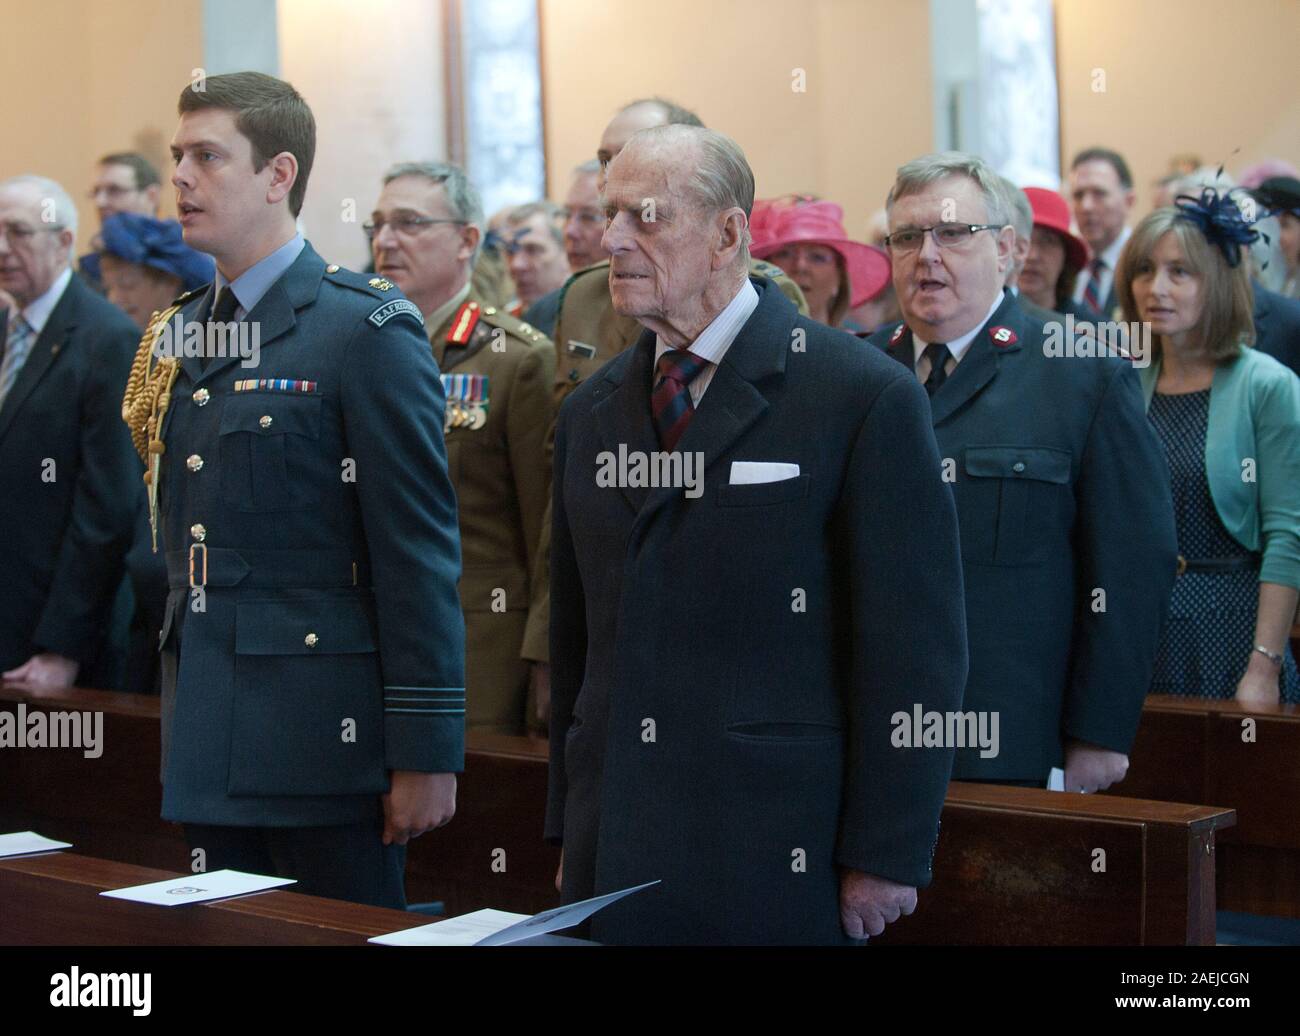 The Duke of Edinburgh attending a service for the 175th anniversary of the Soldier's and Airmen's scripture Association at the Guards Chapel in London. Stock Photo